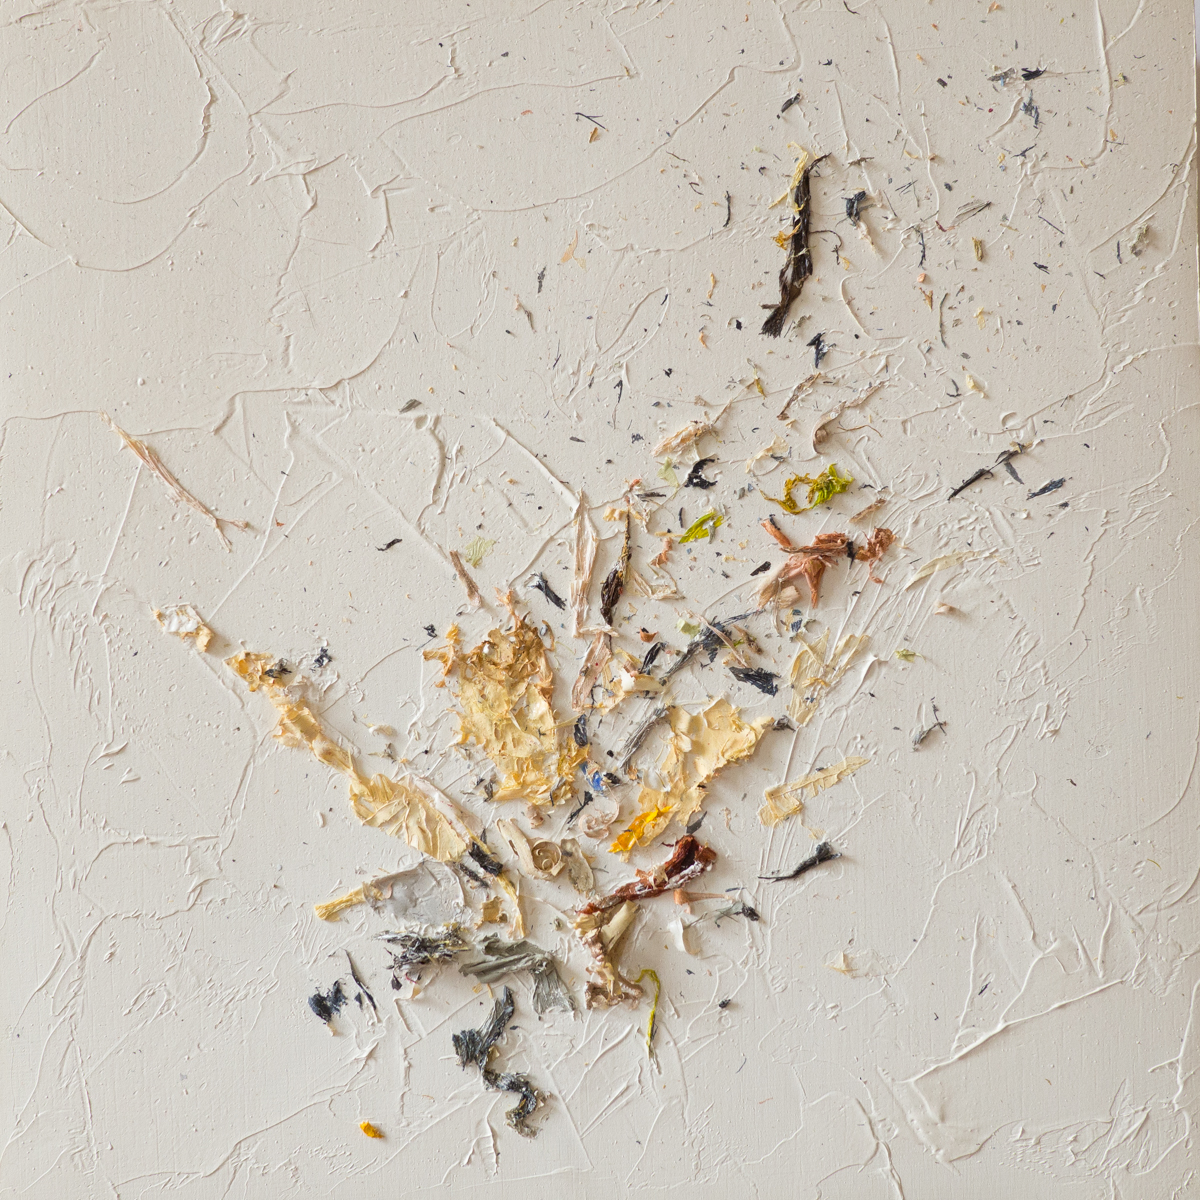   The Complexities of Emotions No.8   oils &amp; oil paint scrapings on wood panel, 6 x 6 